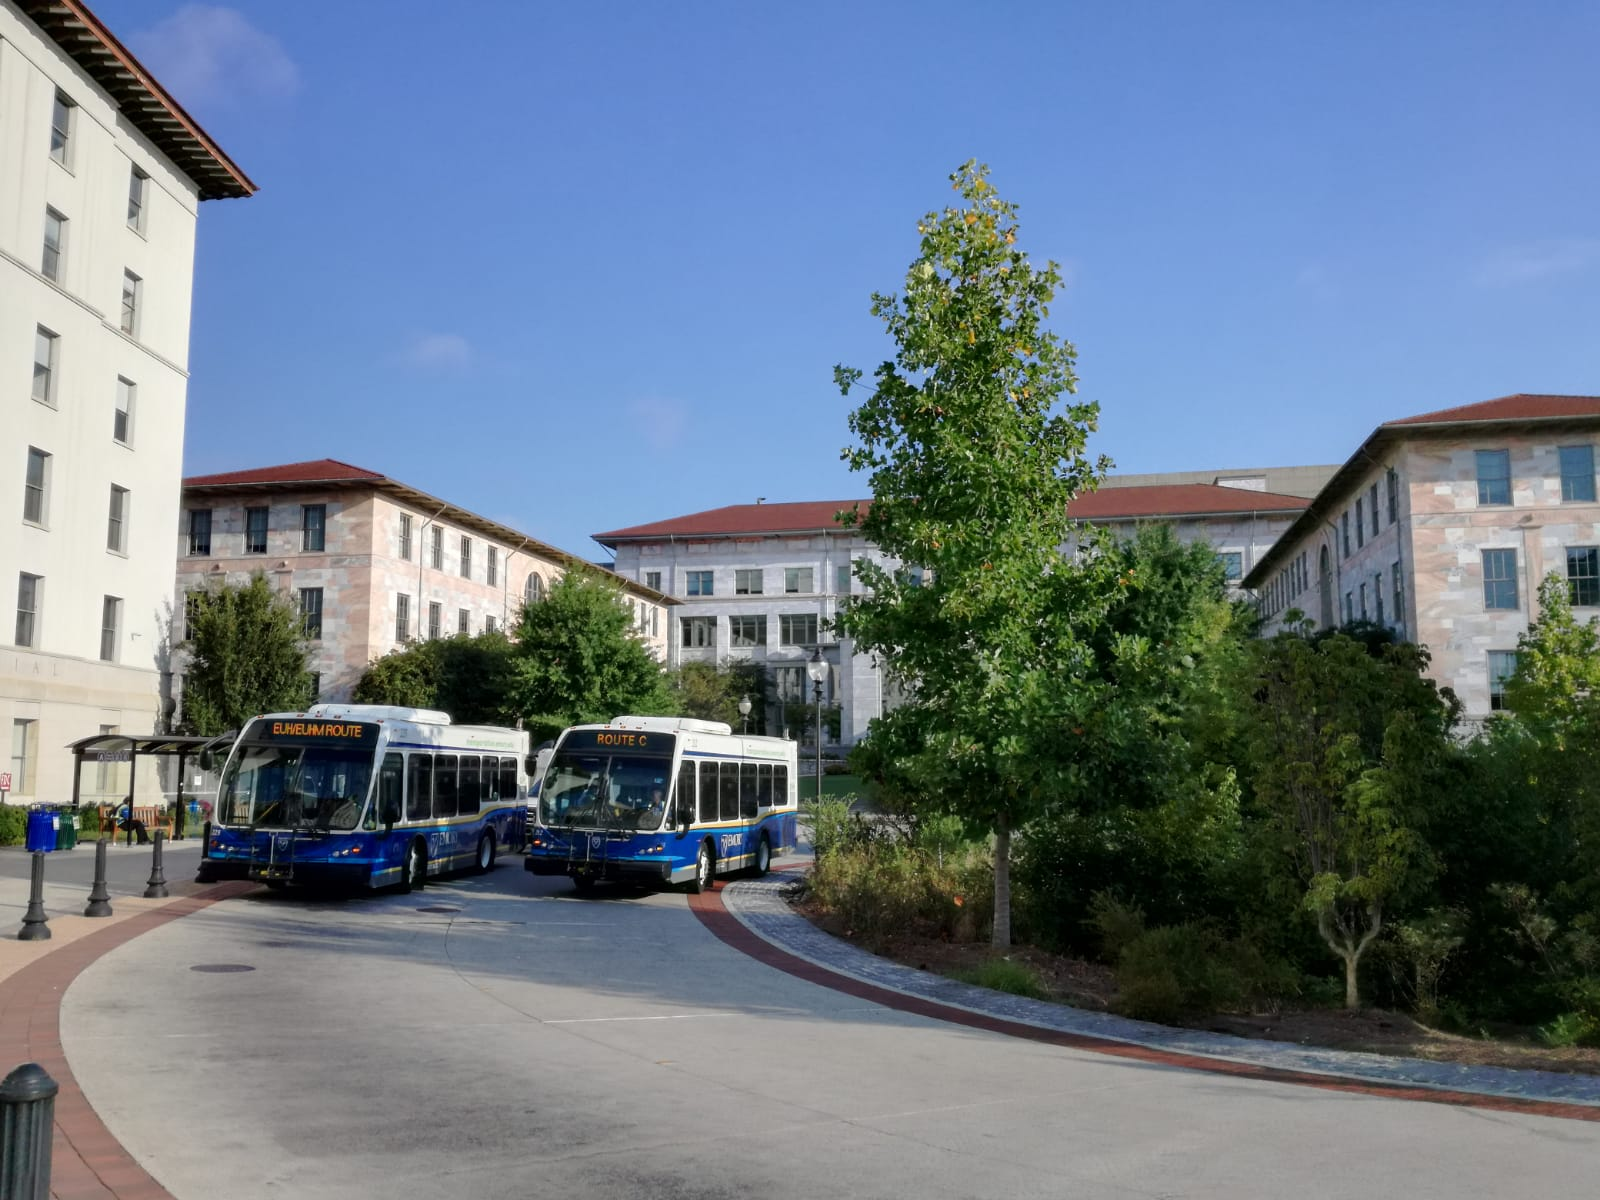 Free shuttles on the Emory campus with School of Medicine in the background